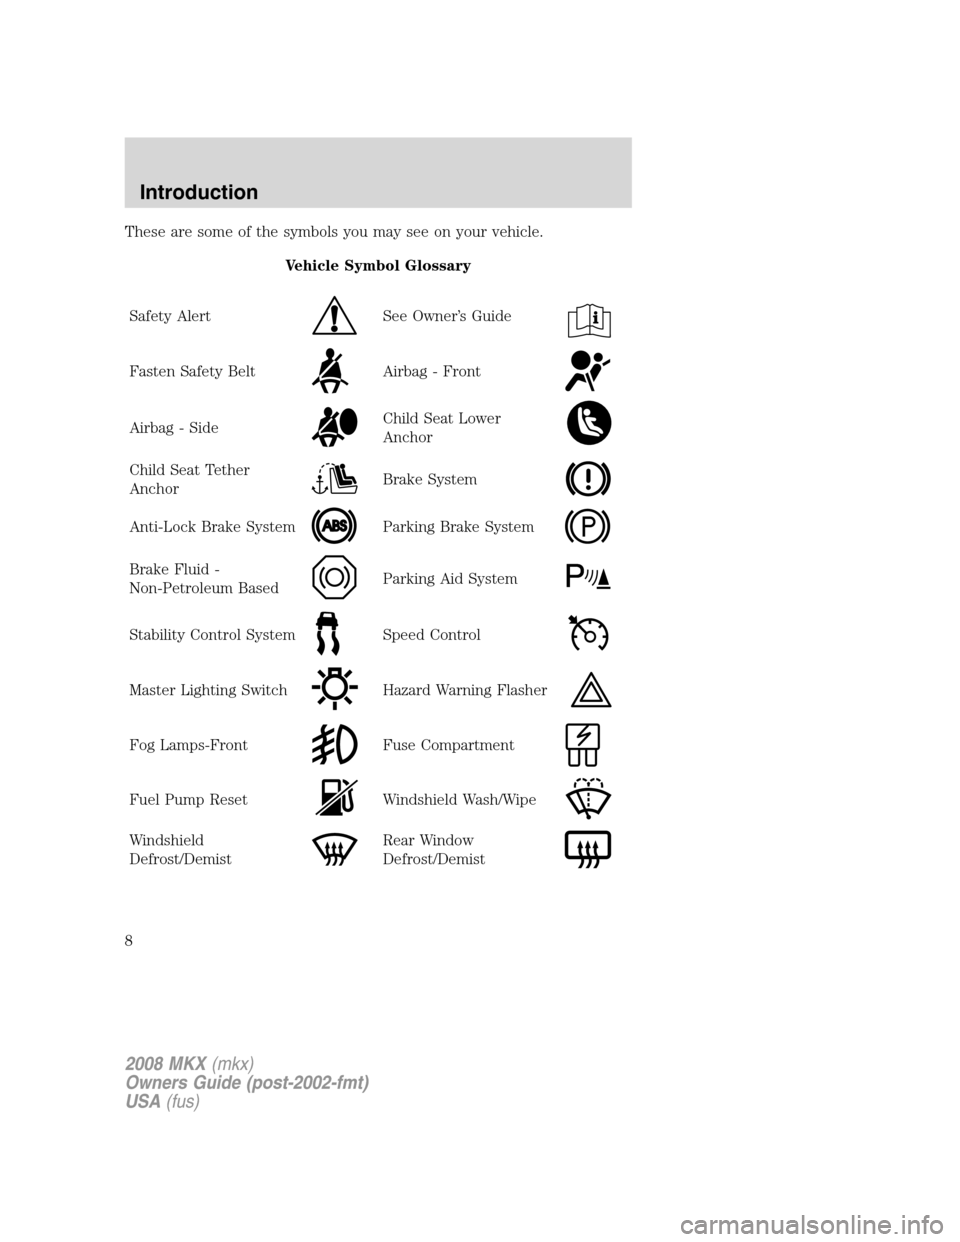 LINCOLN MKX 2008  Owners Manual These are some of the symbols you may see on your vehicle.
Vehicle Symbol Glossary
Safety Alert
See Owner’s Guide
Fasten Safety BeltAirbag - Front
Airbag - SideChild Seat Lower
Anchor
Child Seat Tet